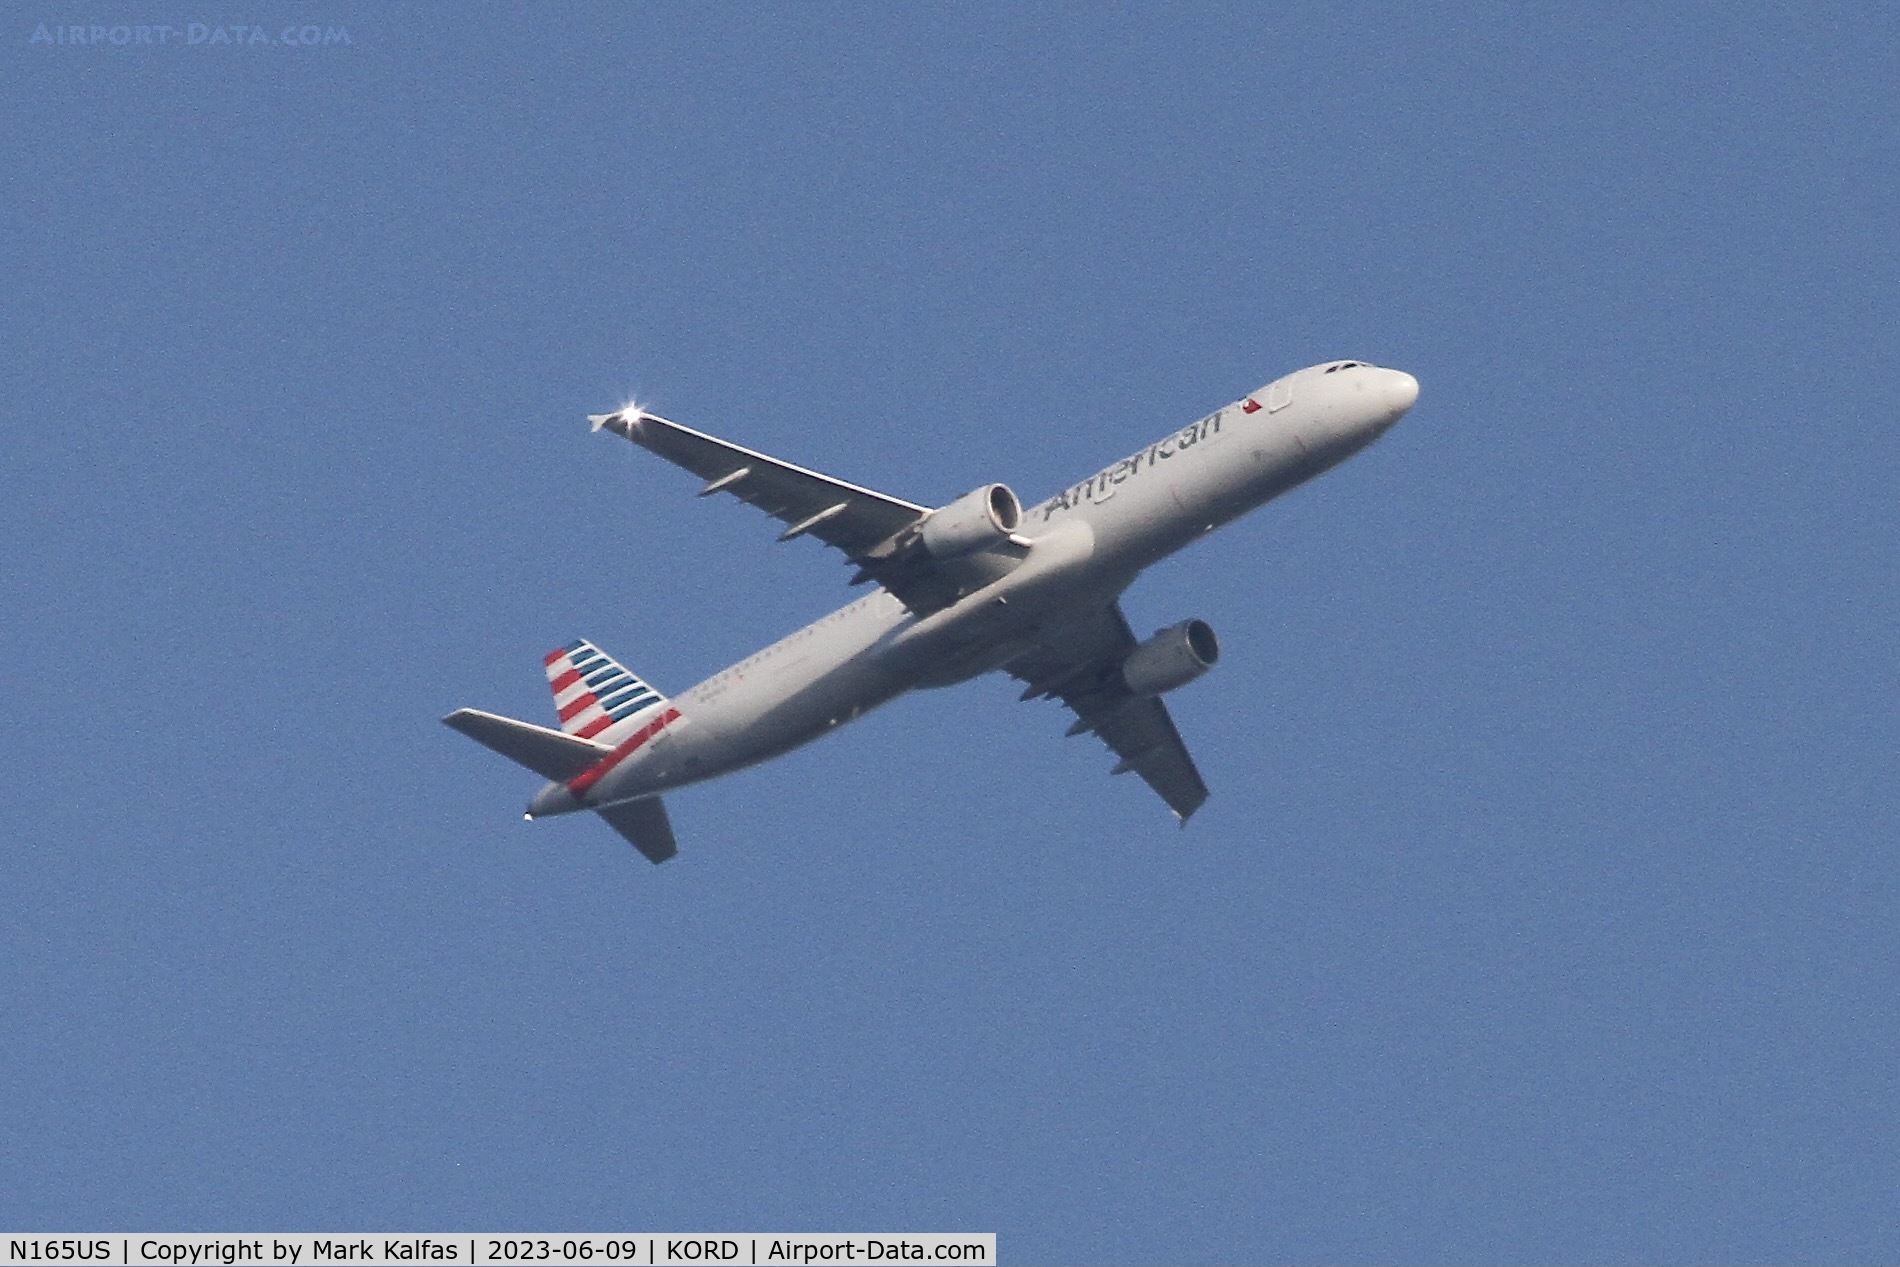 N165US, 2001 Airbus A321-211 C/N 1431, American Airlines A321 N165US operating as AA2857 from CLT to ORD